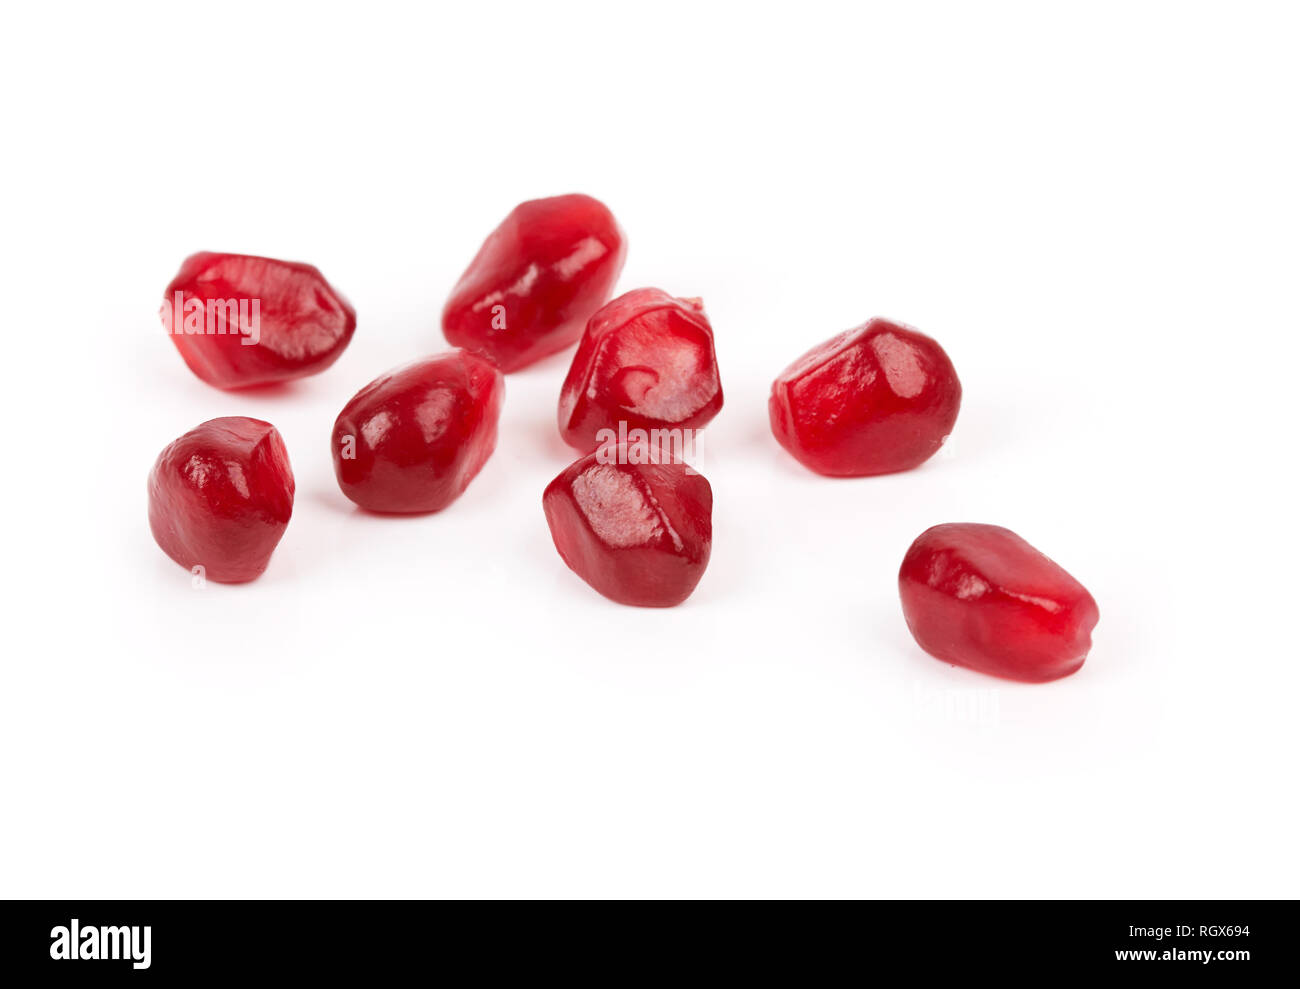 Fresh pomegranate seeds for food on a background Stock Photo